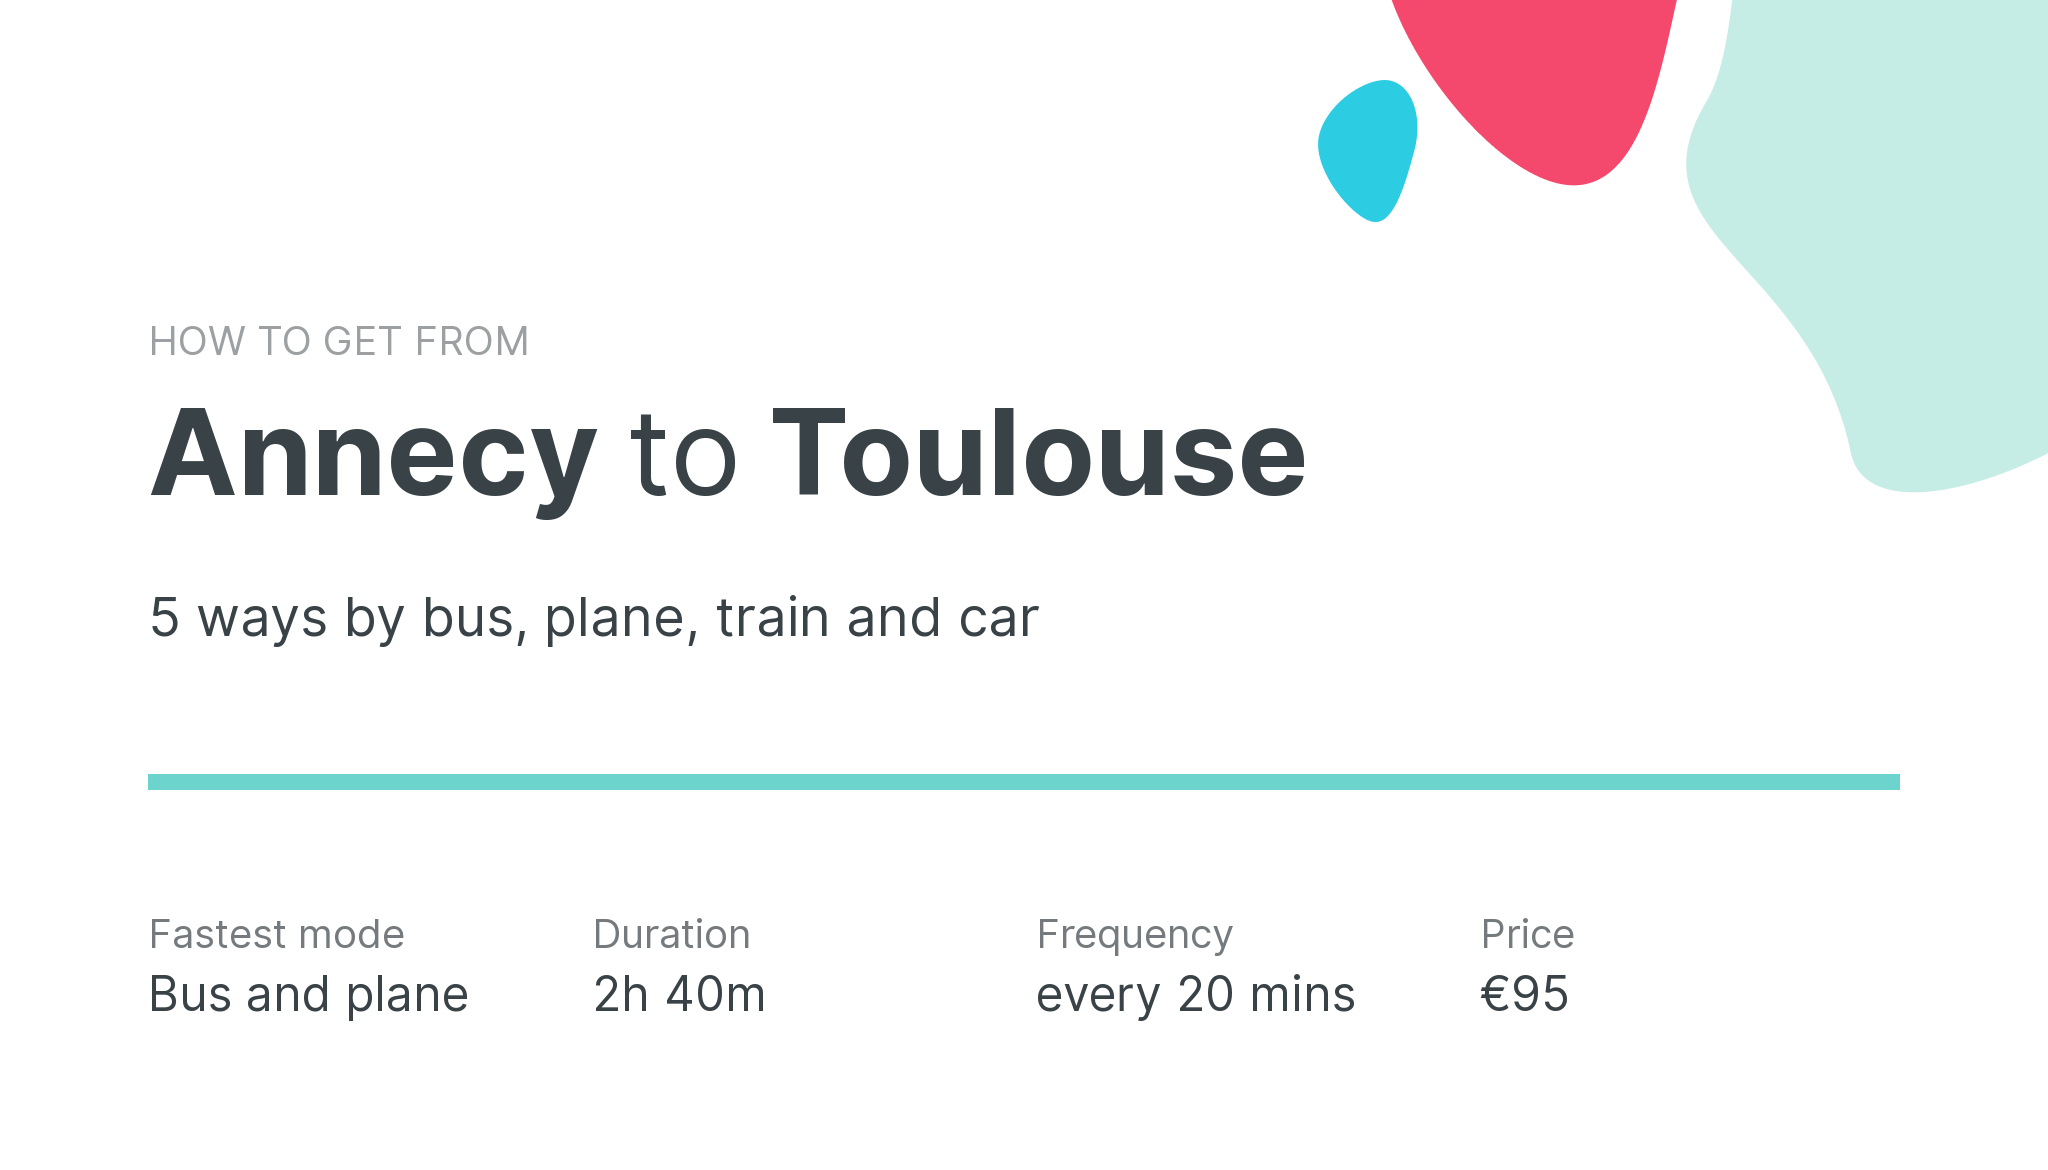 How do I get from Annecy to Toulouse